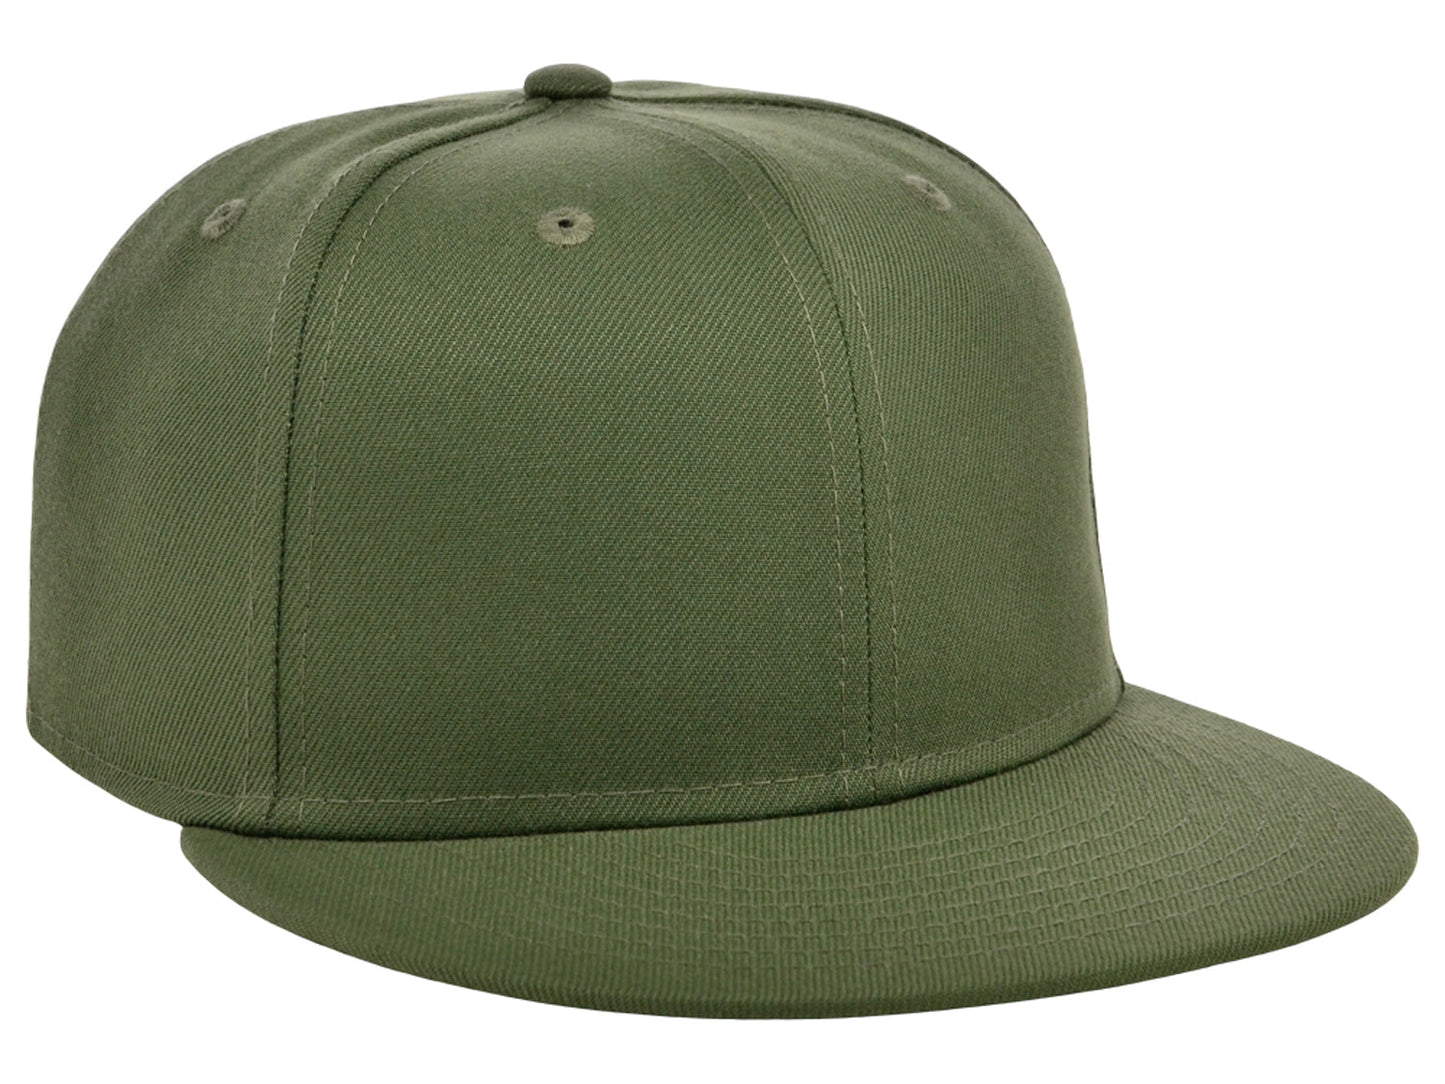 Crowns by Lids Full Court Fitted Cap - Olive